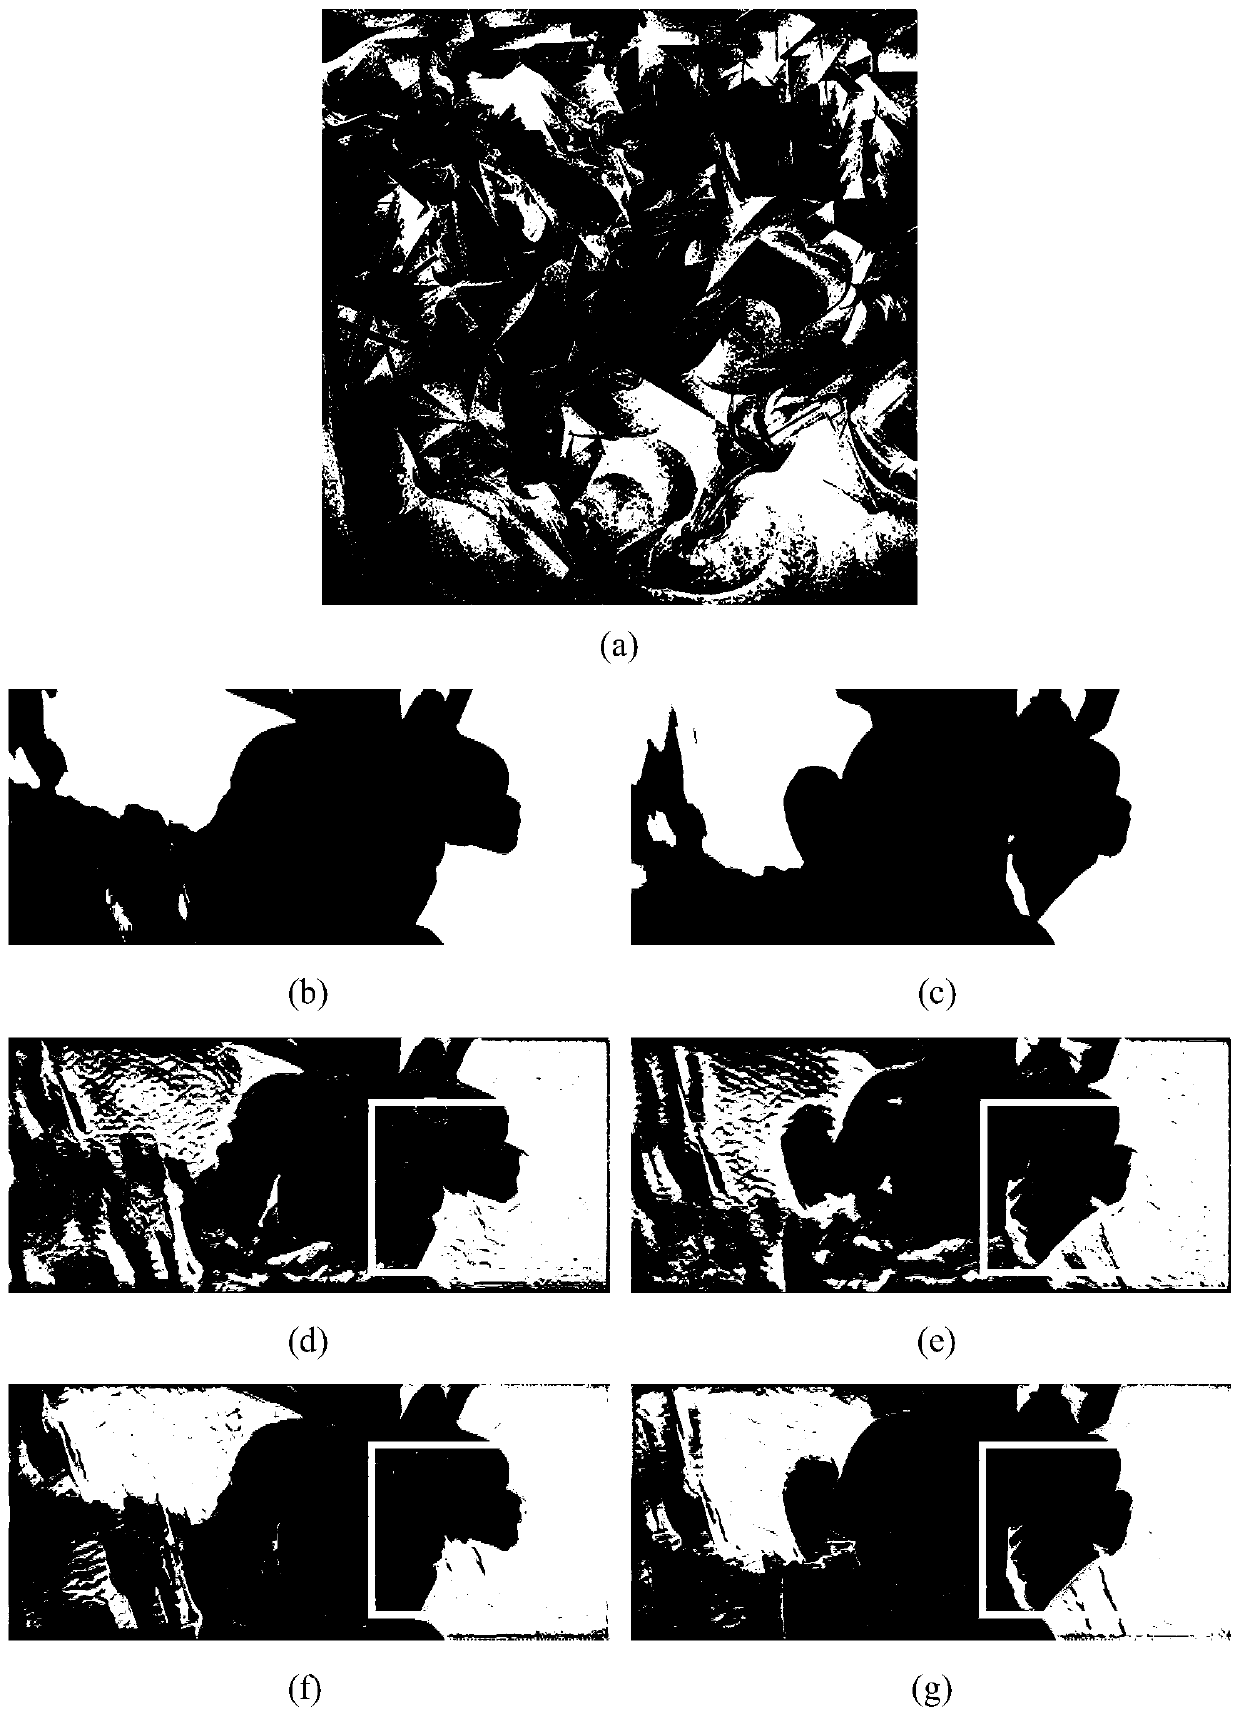 Video style conversion method based on self-encoding structure and gradient order preserving